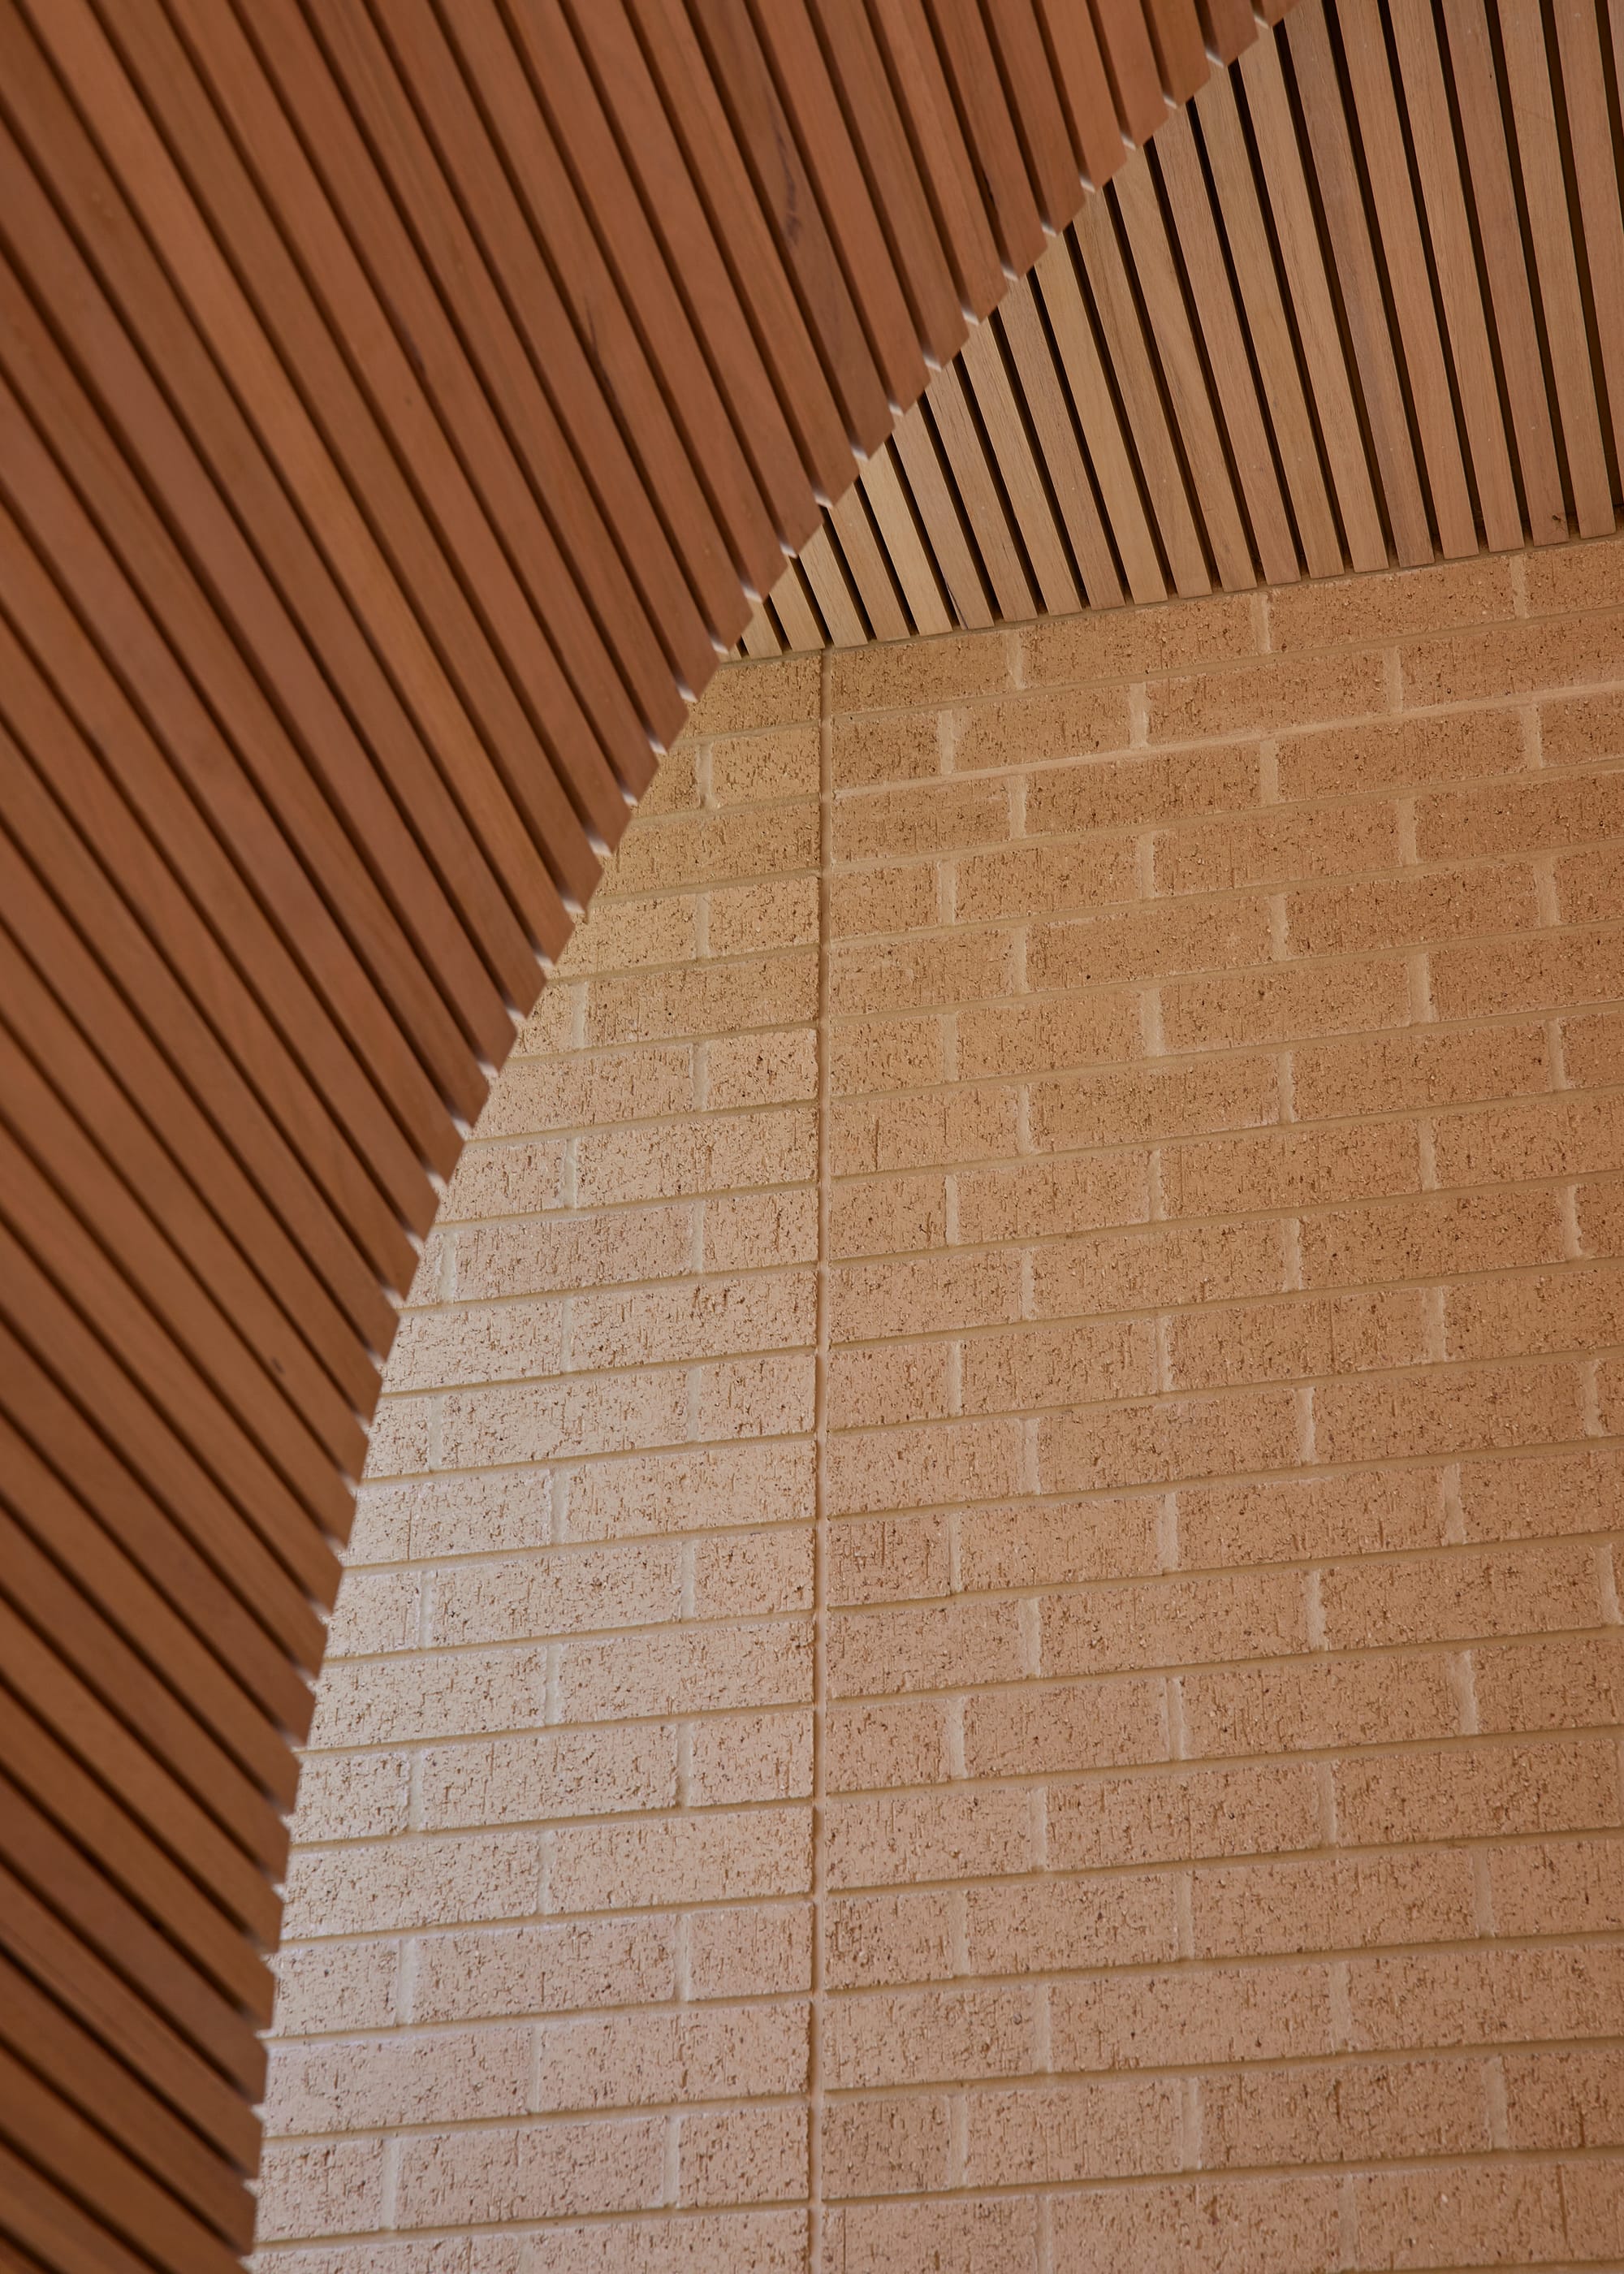 Harriet's House by SO:Architecture. Photography by Sean Fennessy. Close up or curving timber clad ceiling meeting brick walls.